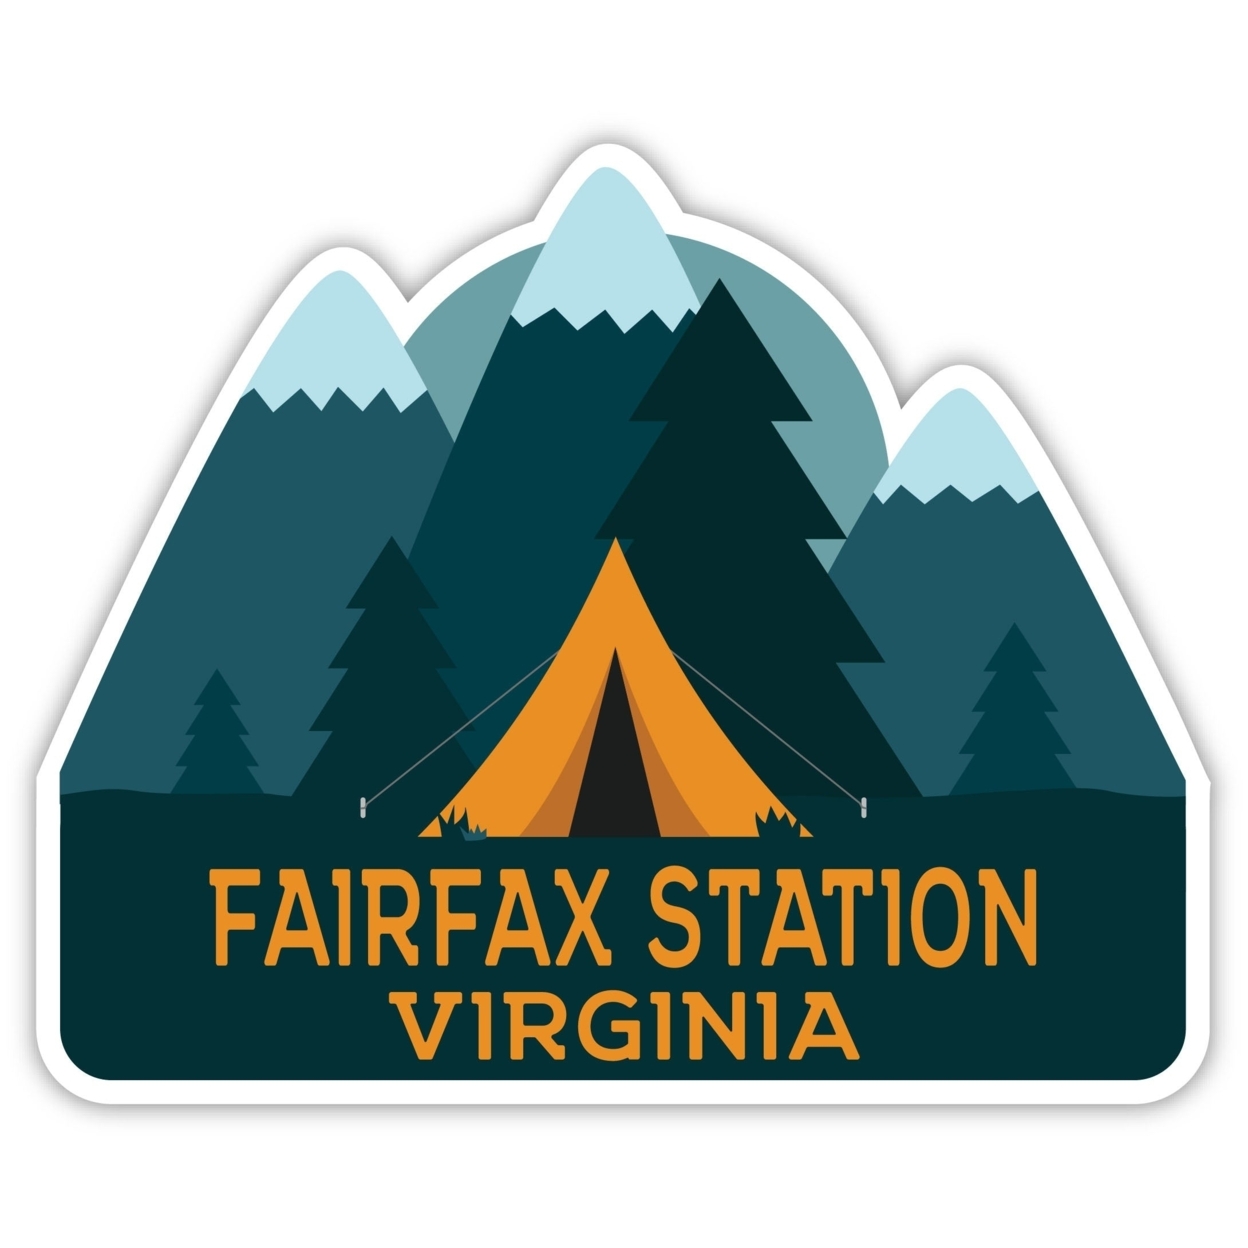 Fairfax Station Virginia Souvenir Decorative Stickers (Choose Theme And Size) - 4-Pack, 12-Inch, Tent